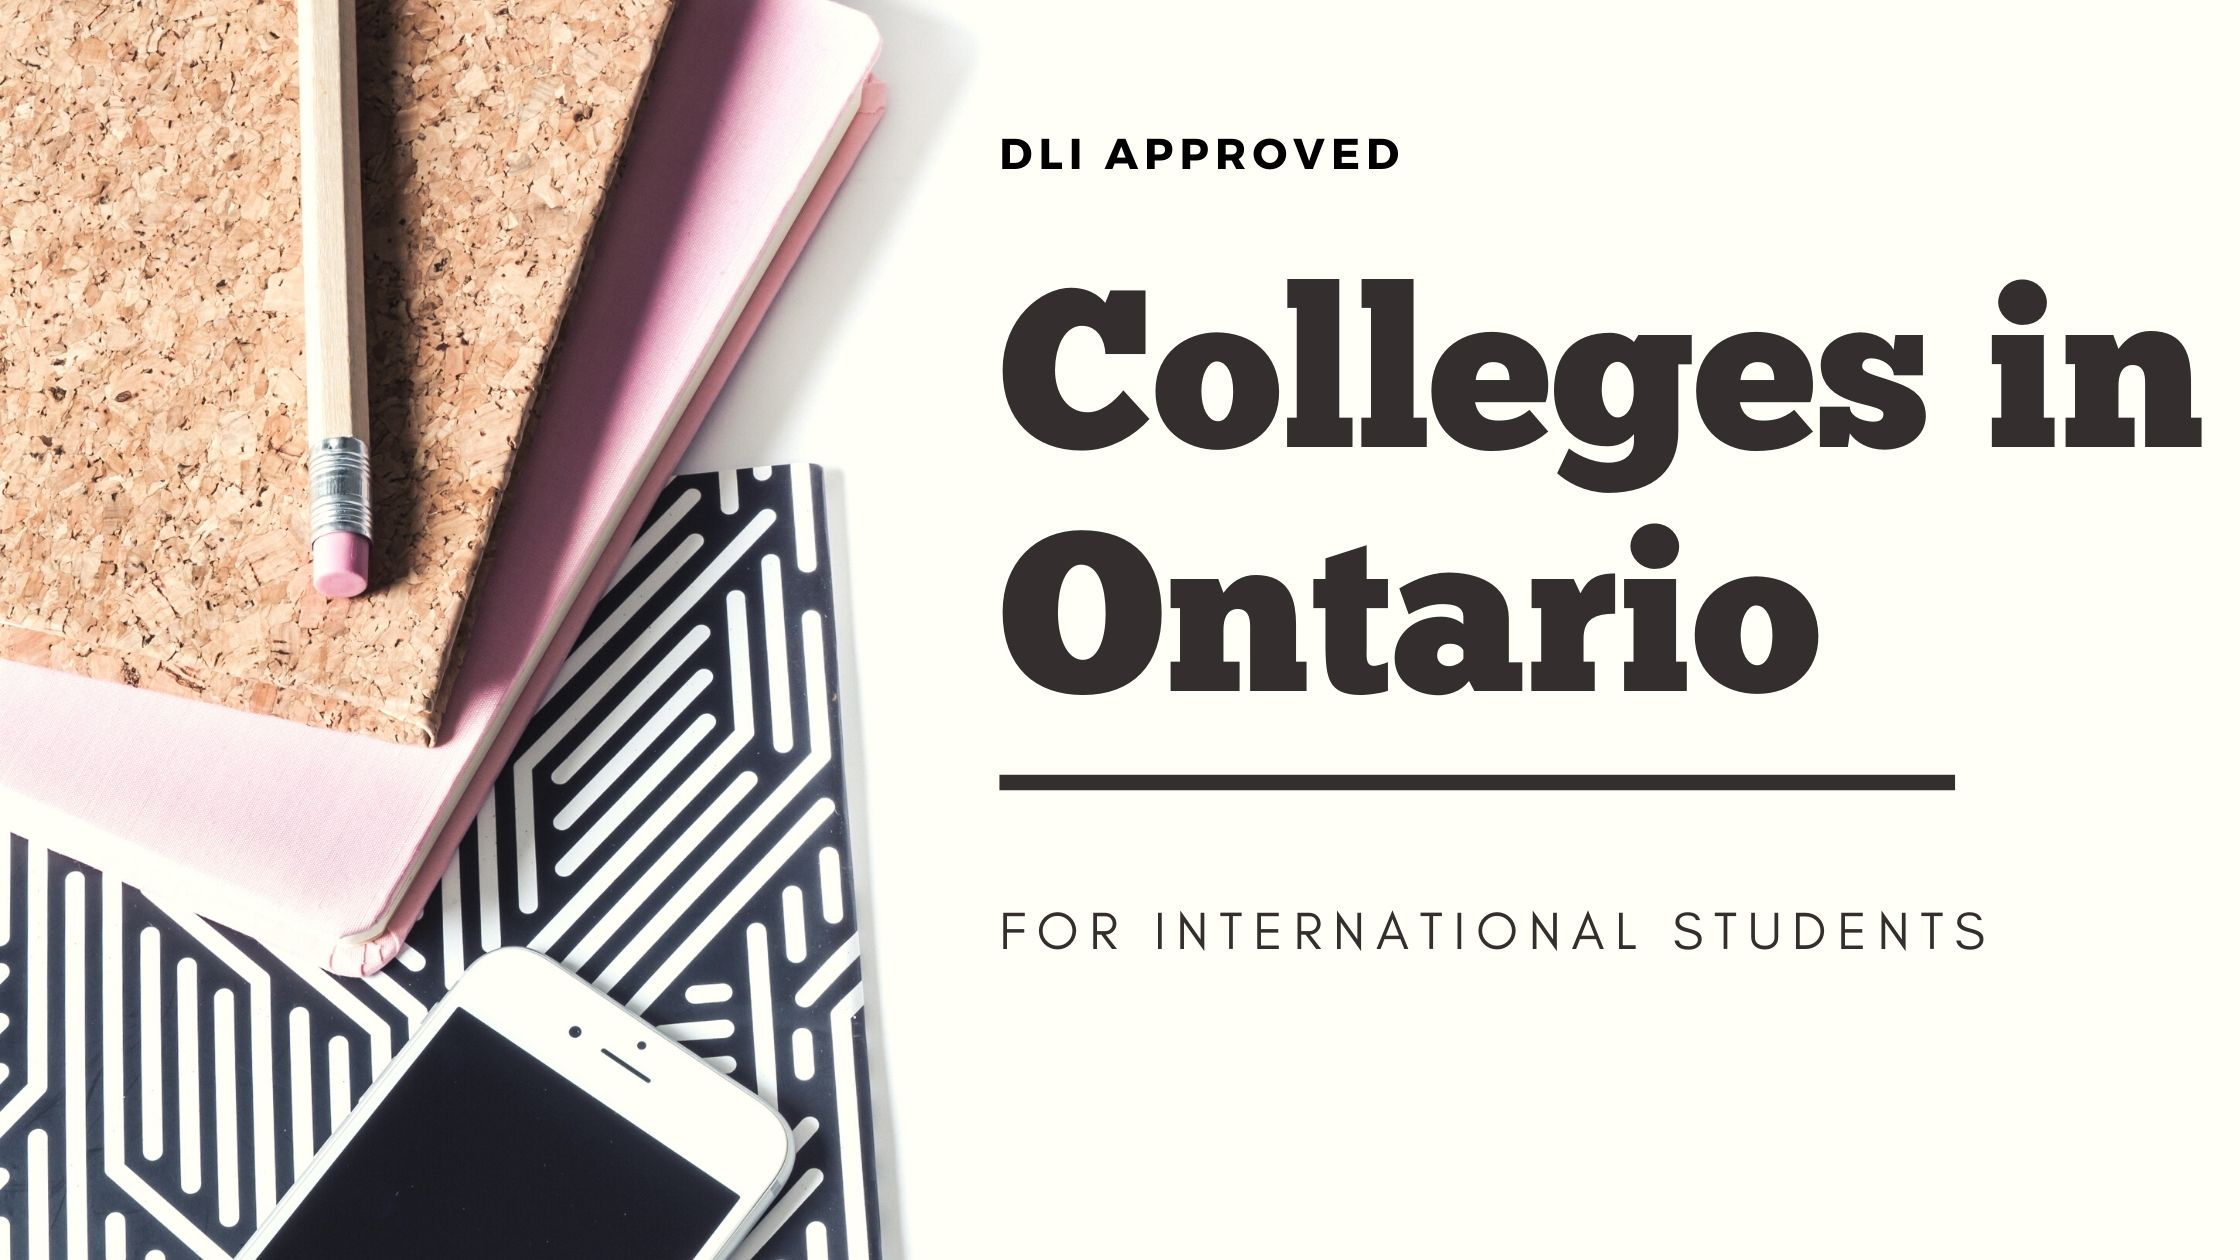 Approved DLI List for International Students